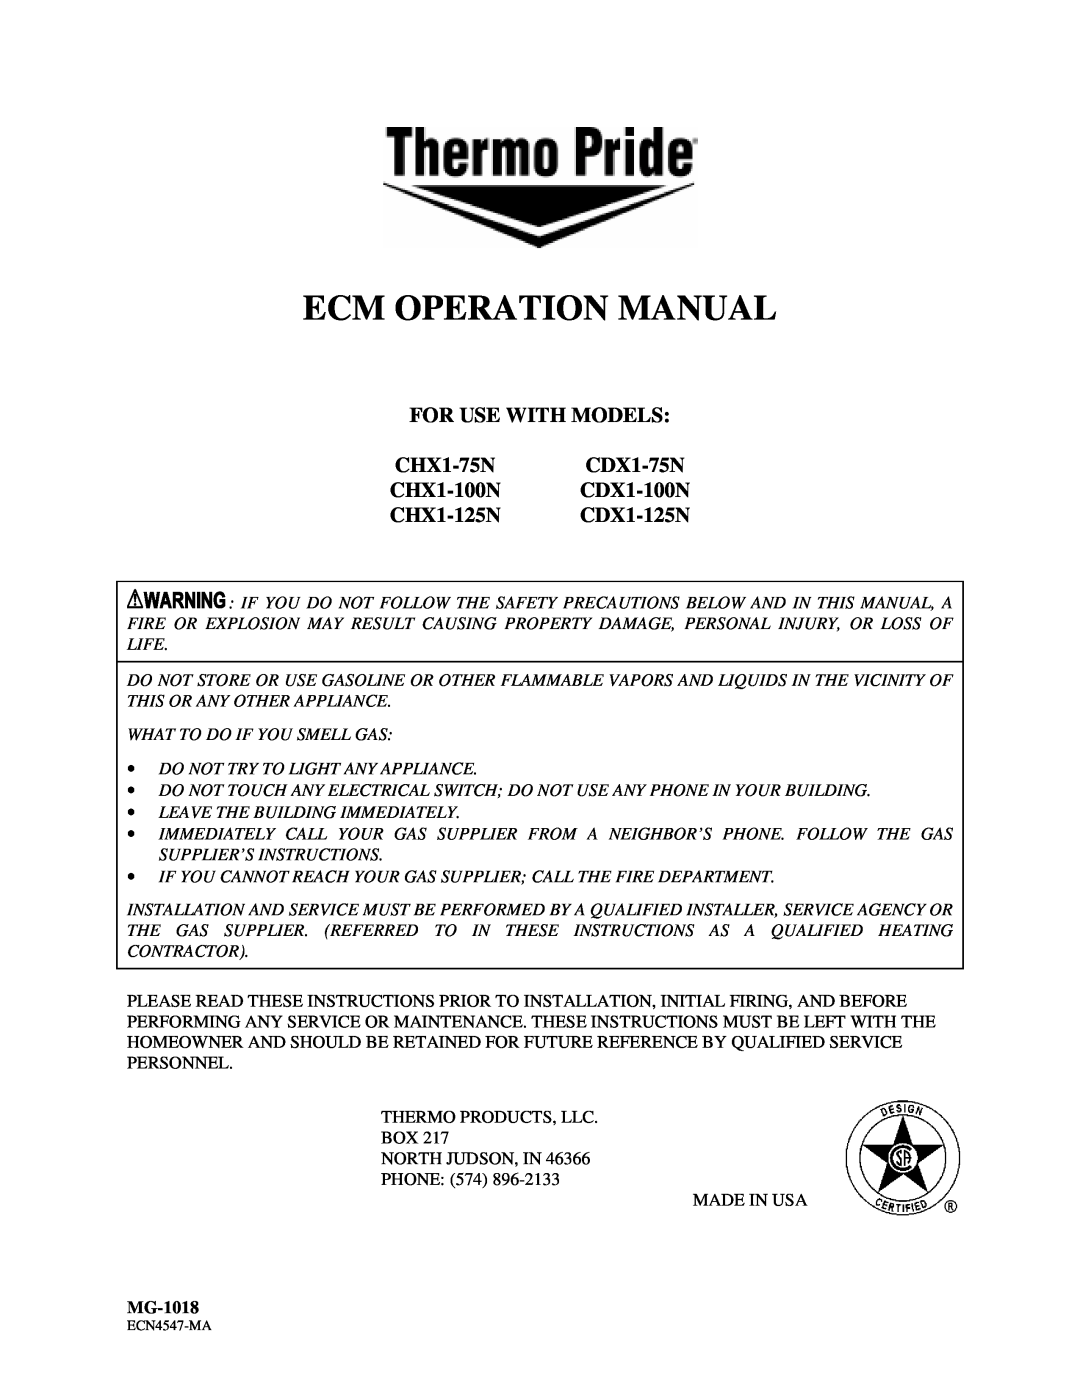 Thermo Products MG-1018 operation manual FOR USE WITH MODELS CHX1-75N CDX1-75N, CHX1-100N CDX1-100N CHX1-125N CDX1-125N 